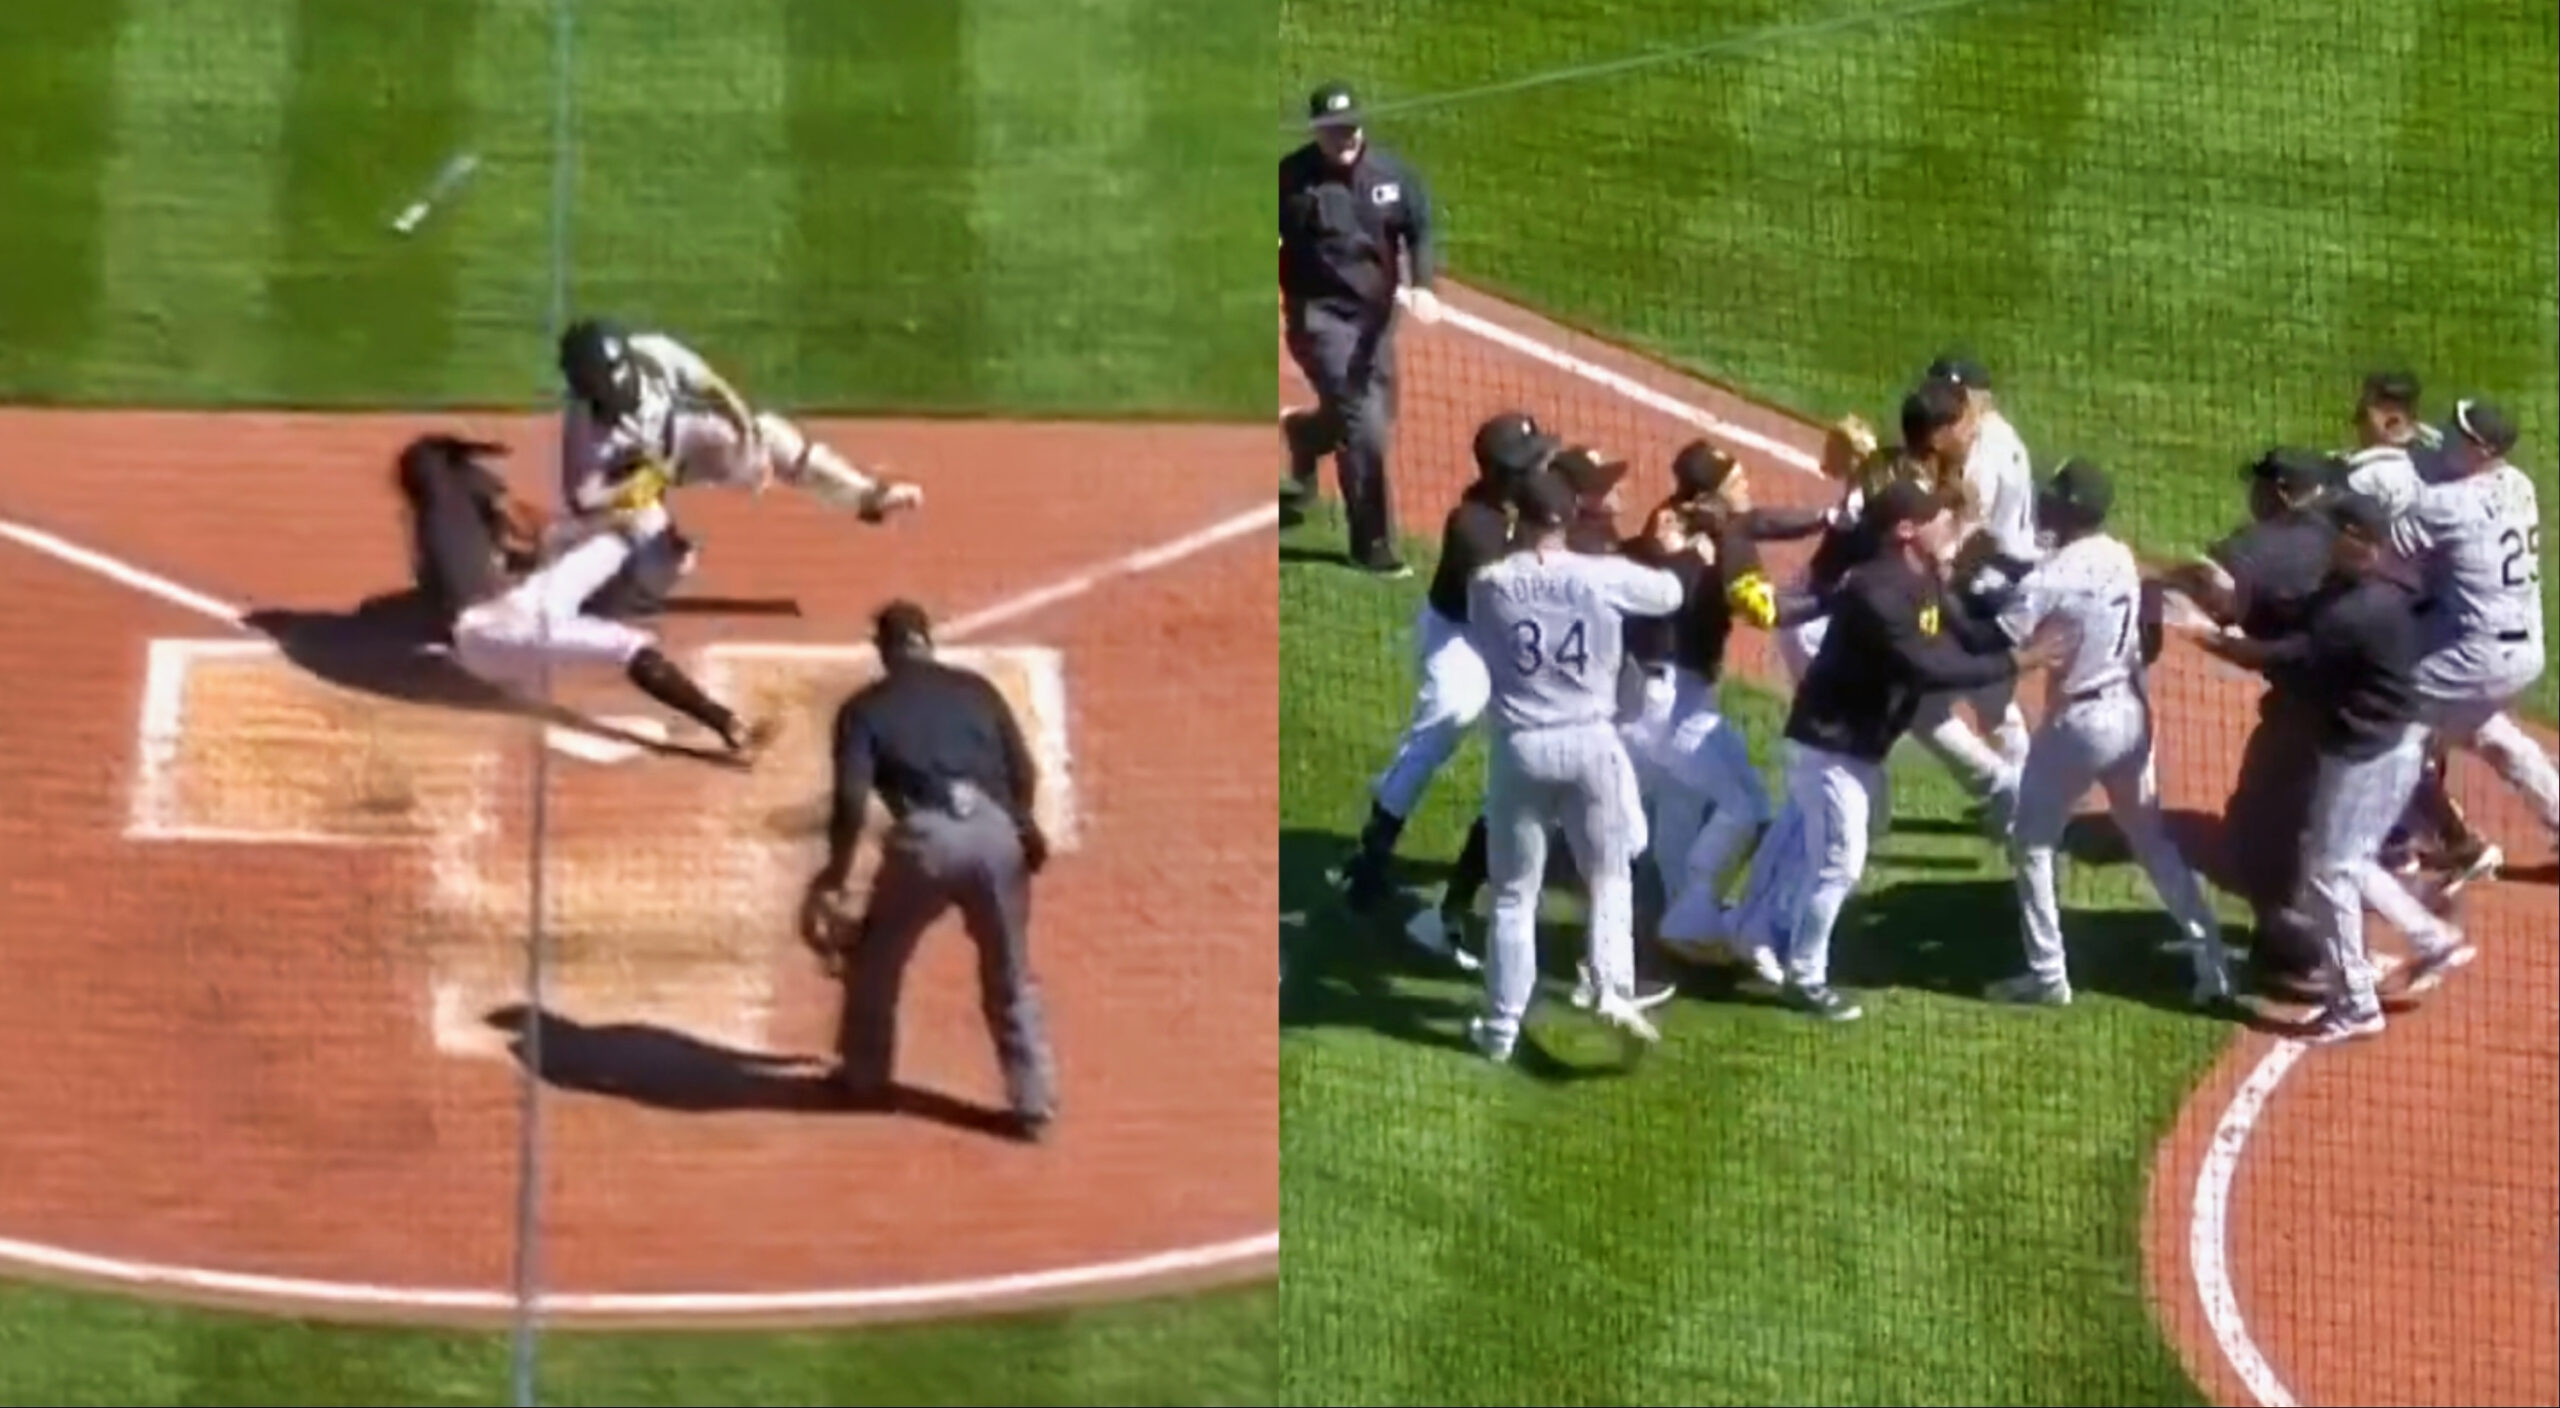 Oneil Cruz injured on home plate collision, leads to Pirates-White